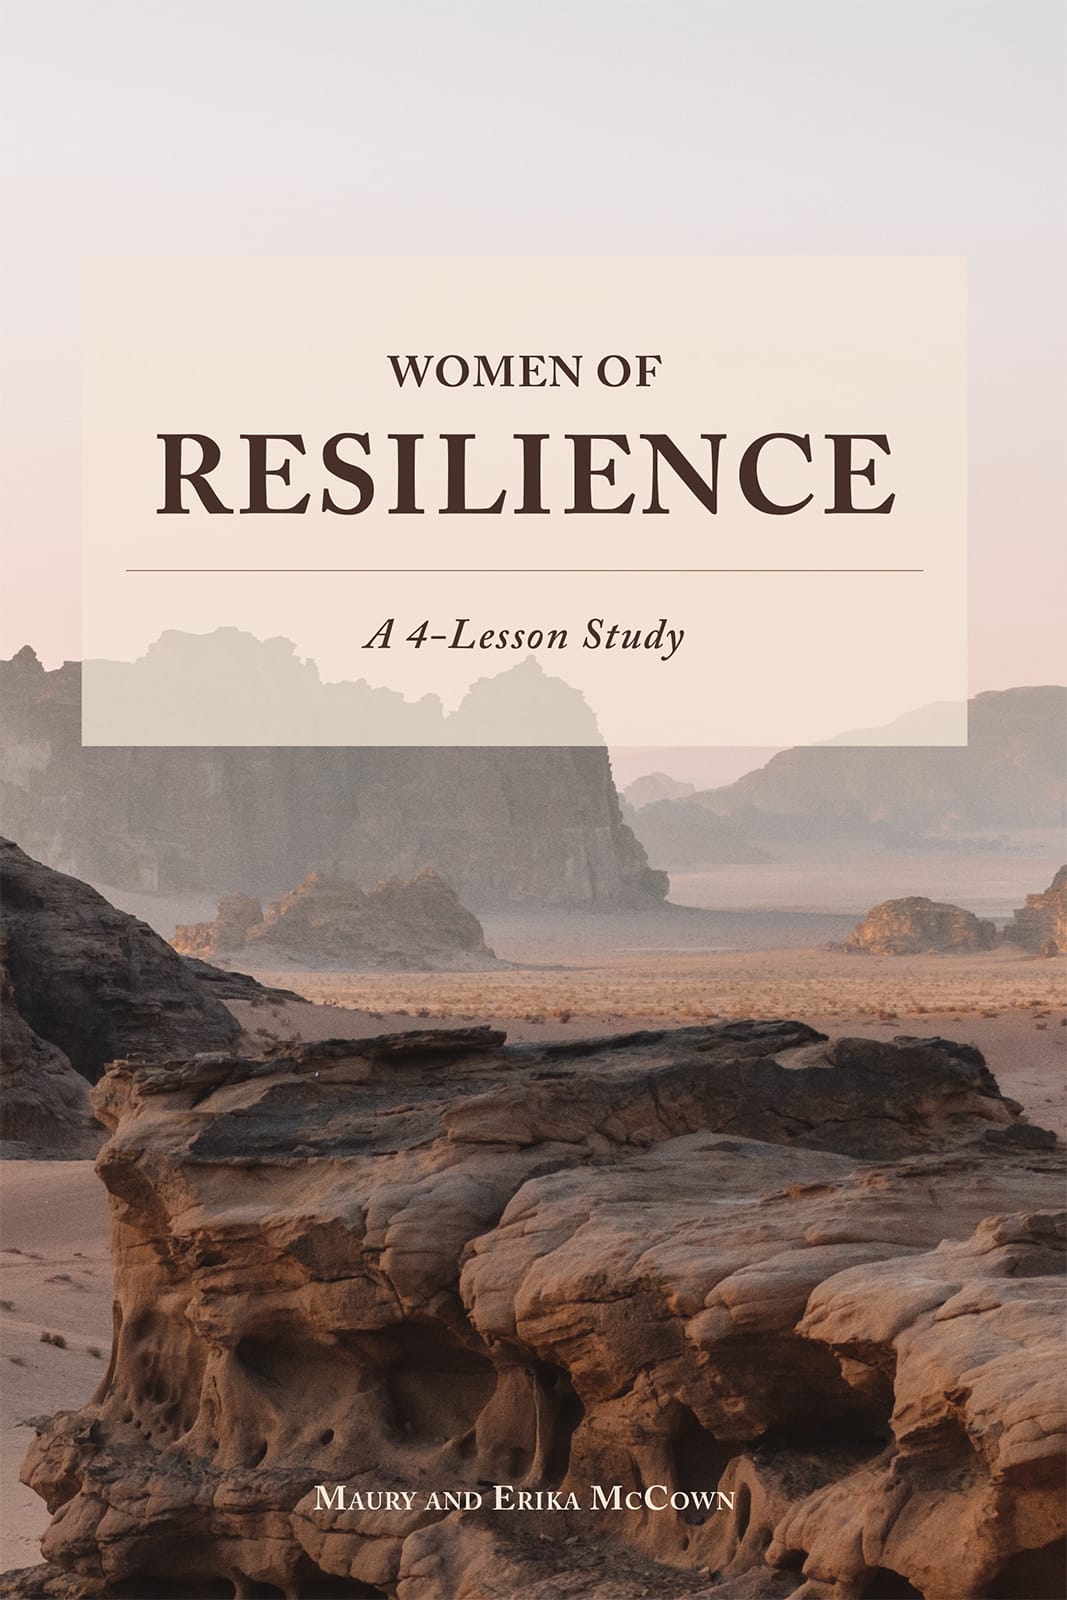 Women of Resilience